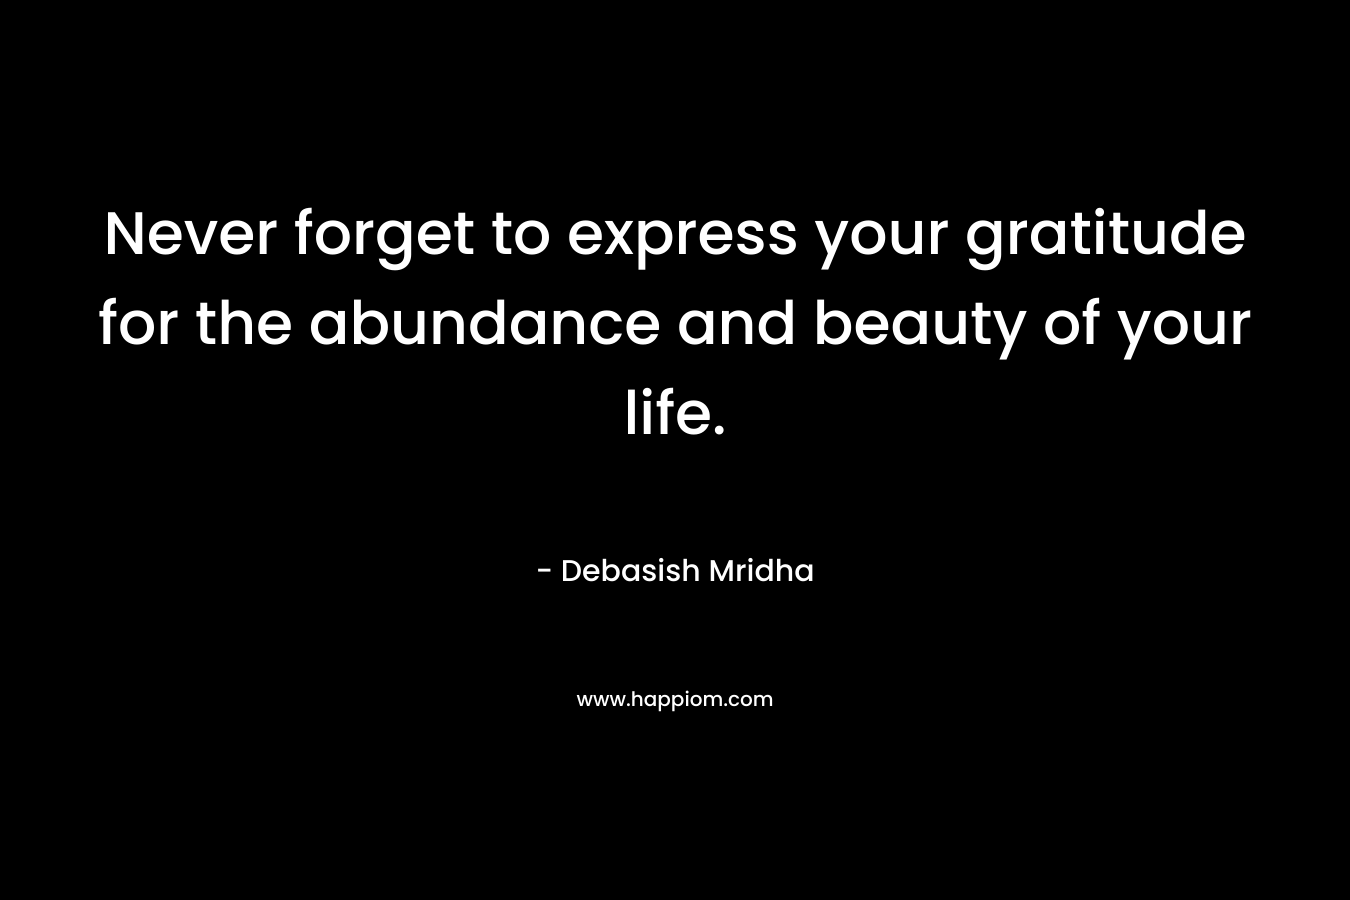 Never forget to express your gratitude for the abundance and beauty of your life.